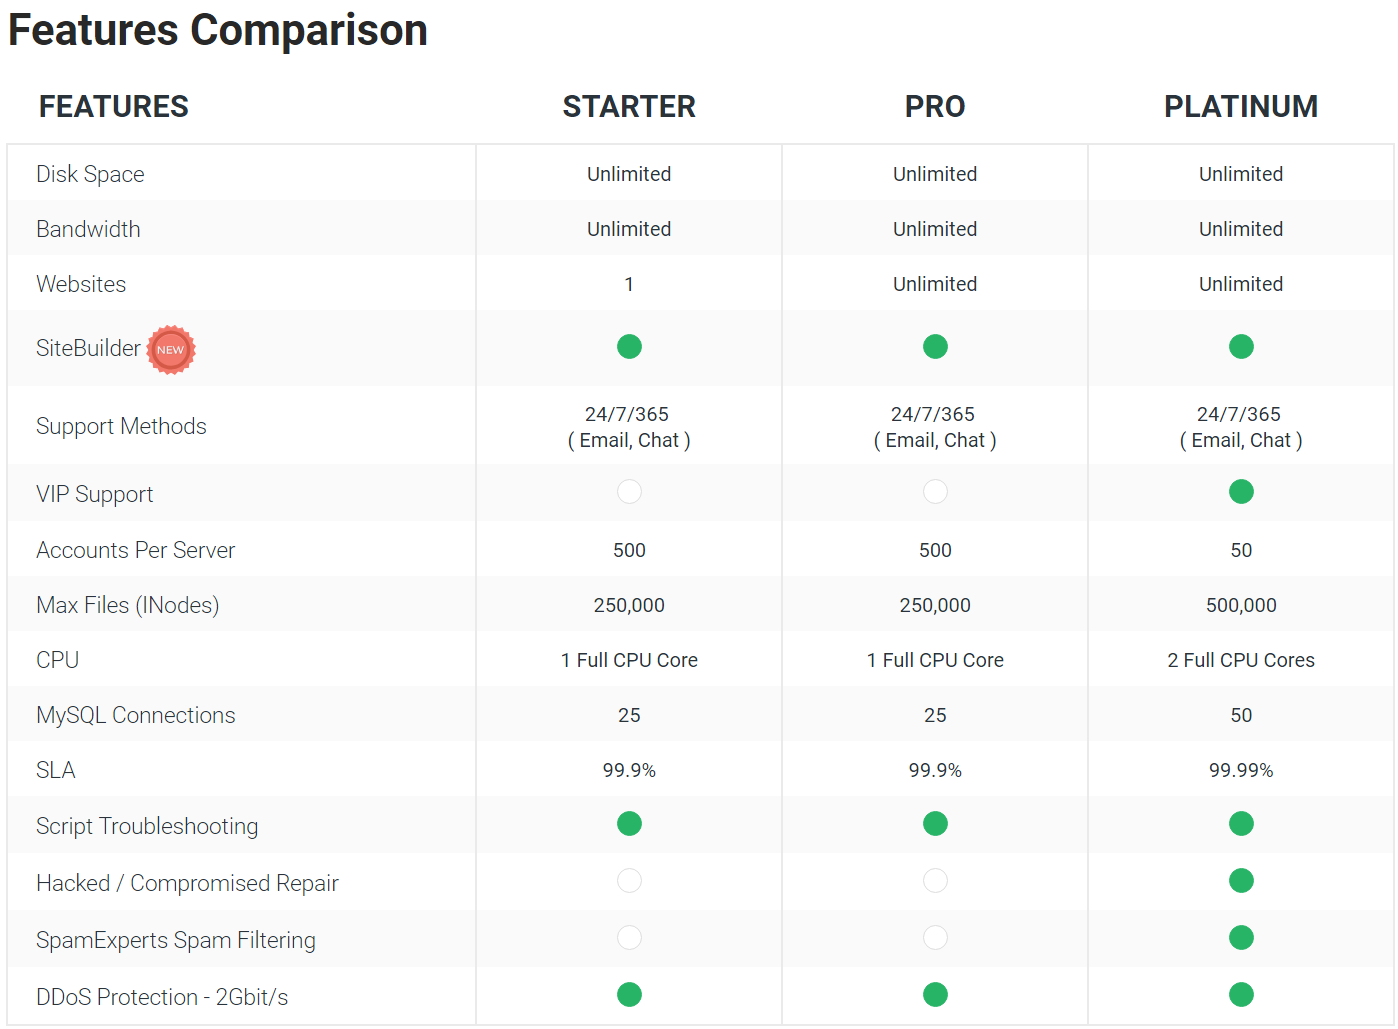 StableHost Review- The Shared Hosting Features Comparison